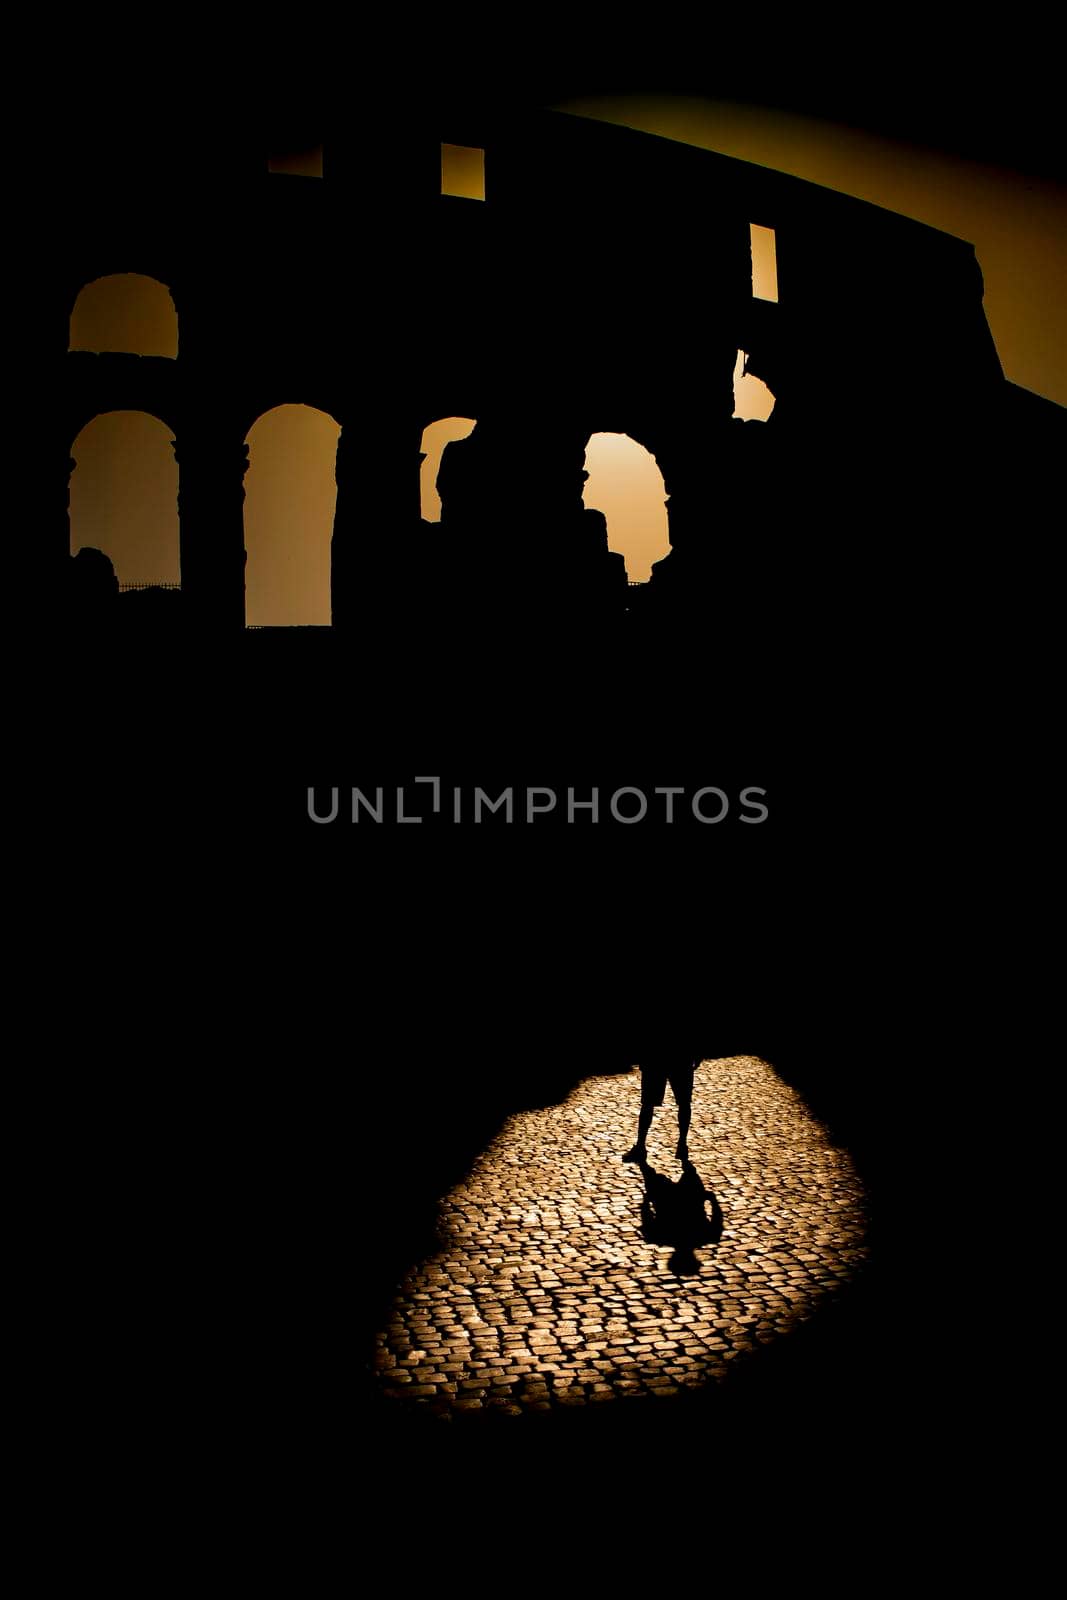 Street photography represents the shadows that arise at sunset time